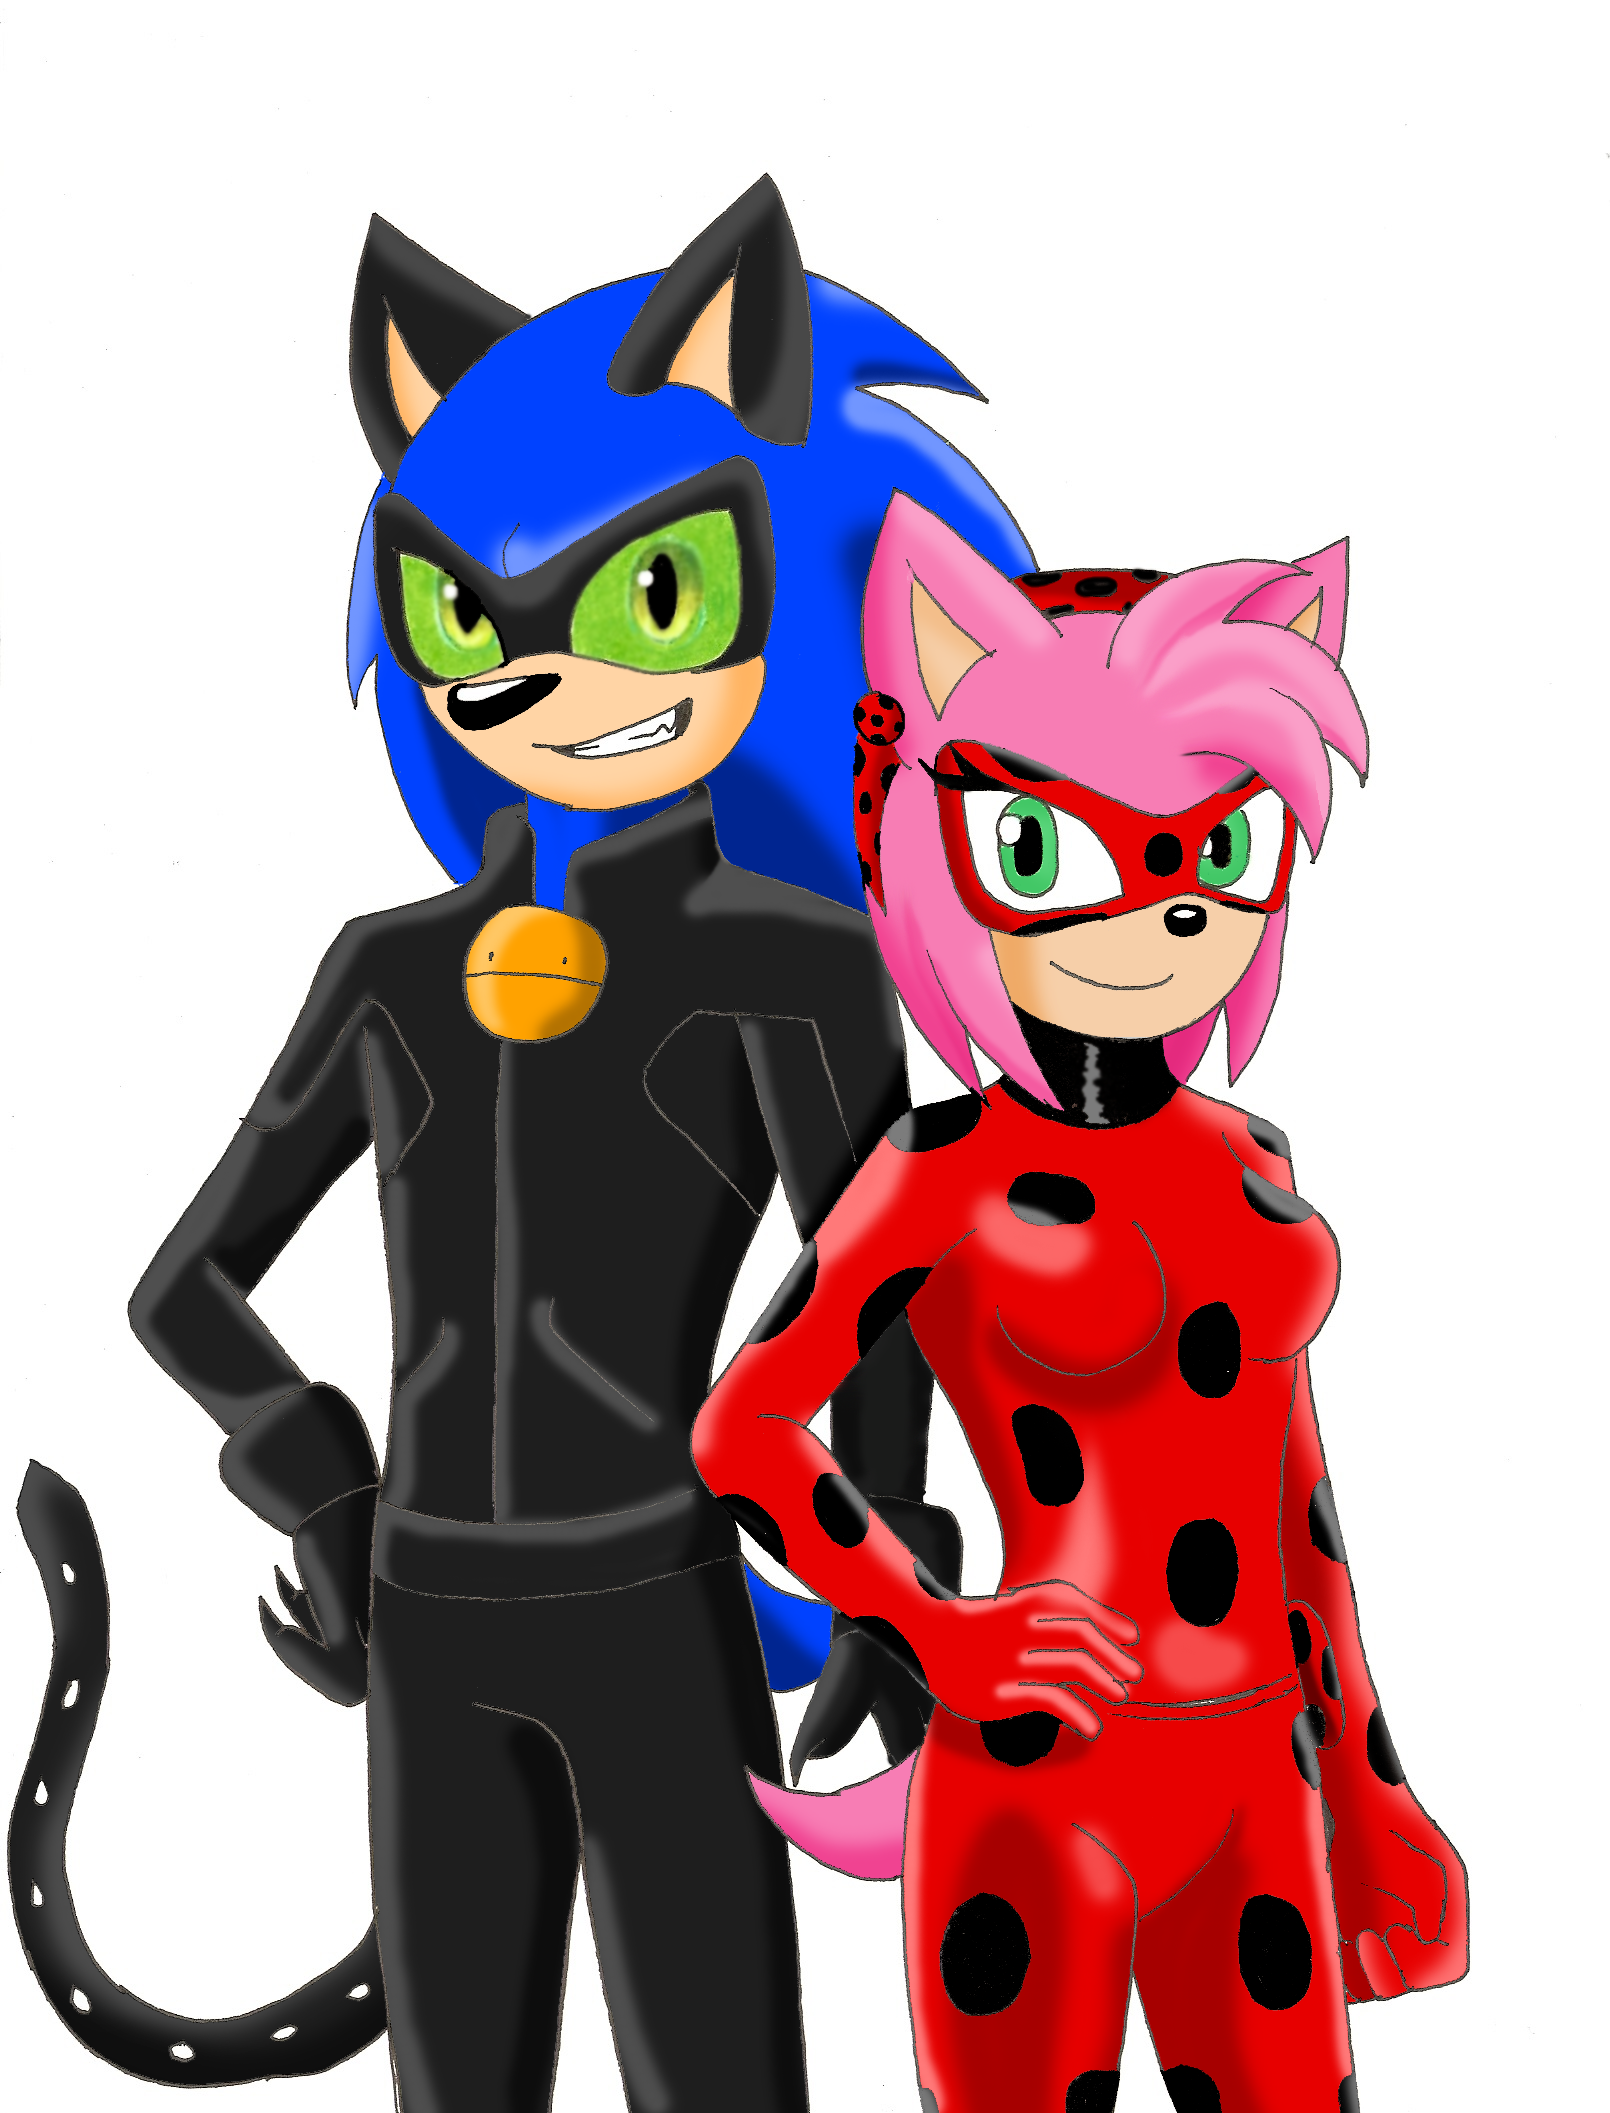 Miraculous Ladybug by Insomniac Games by sonicfighter on DeviantArt